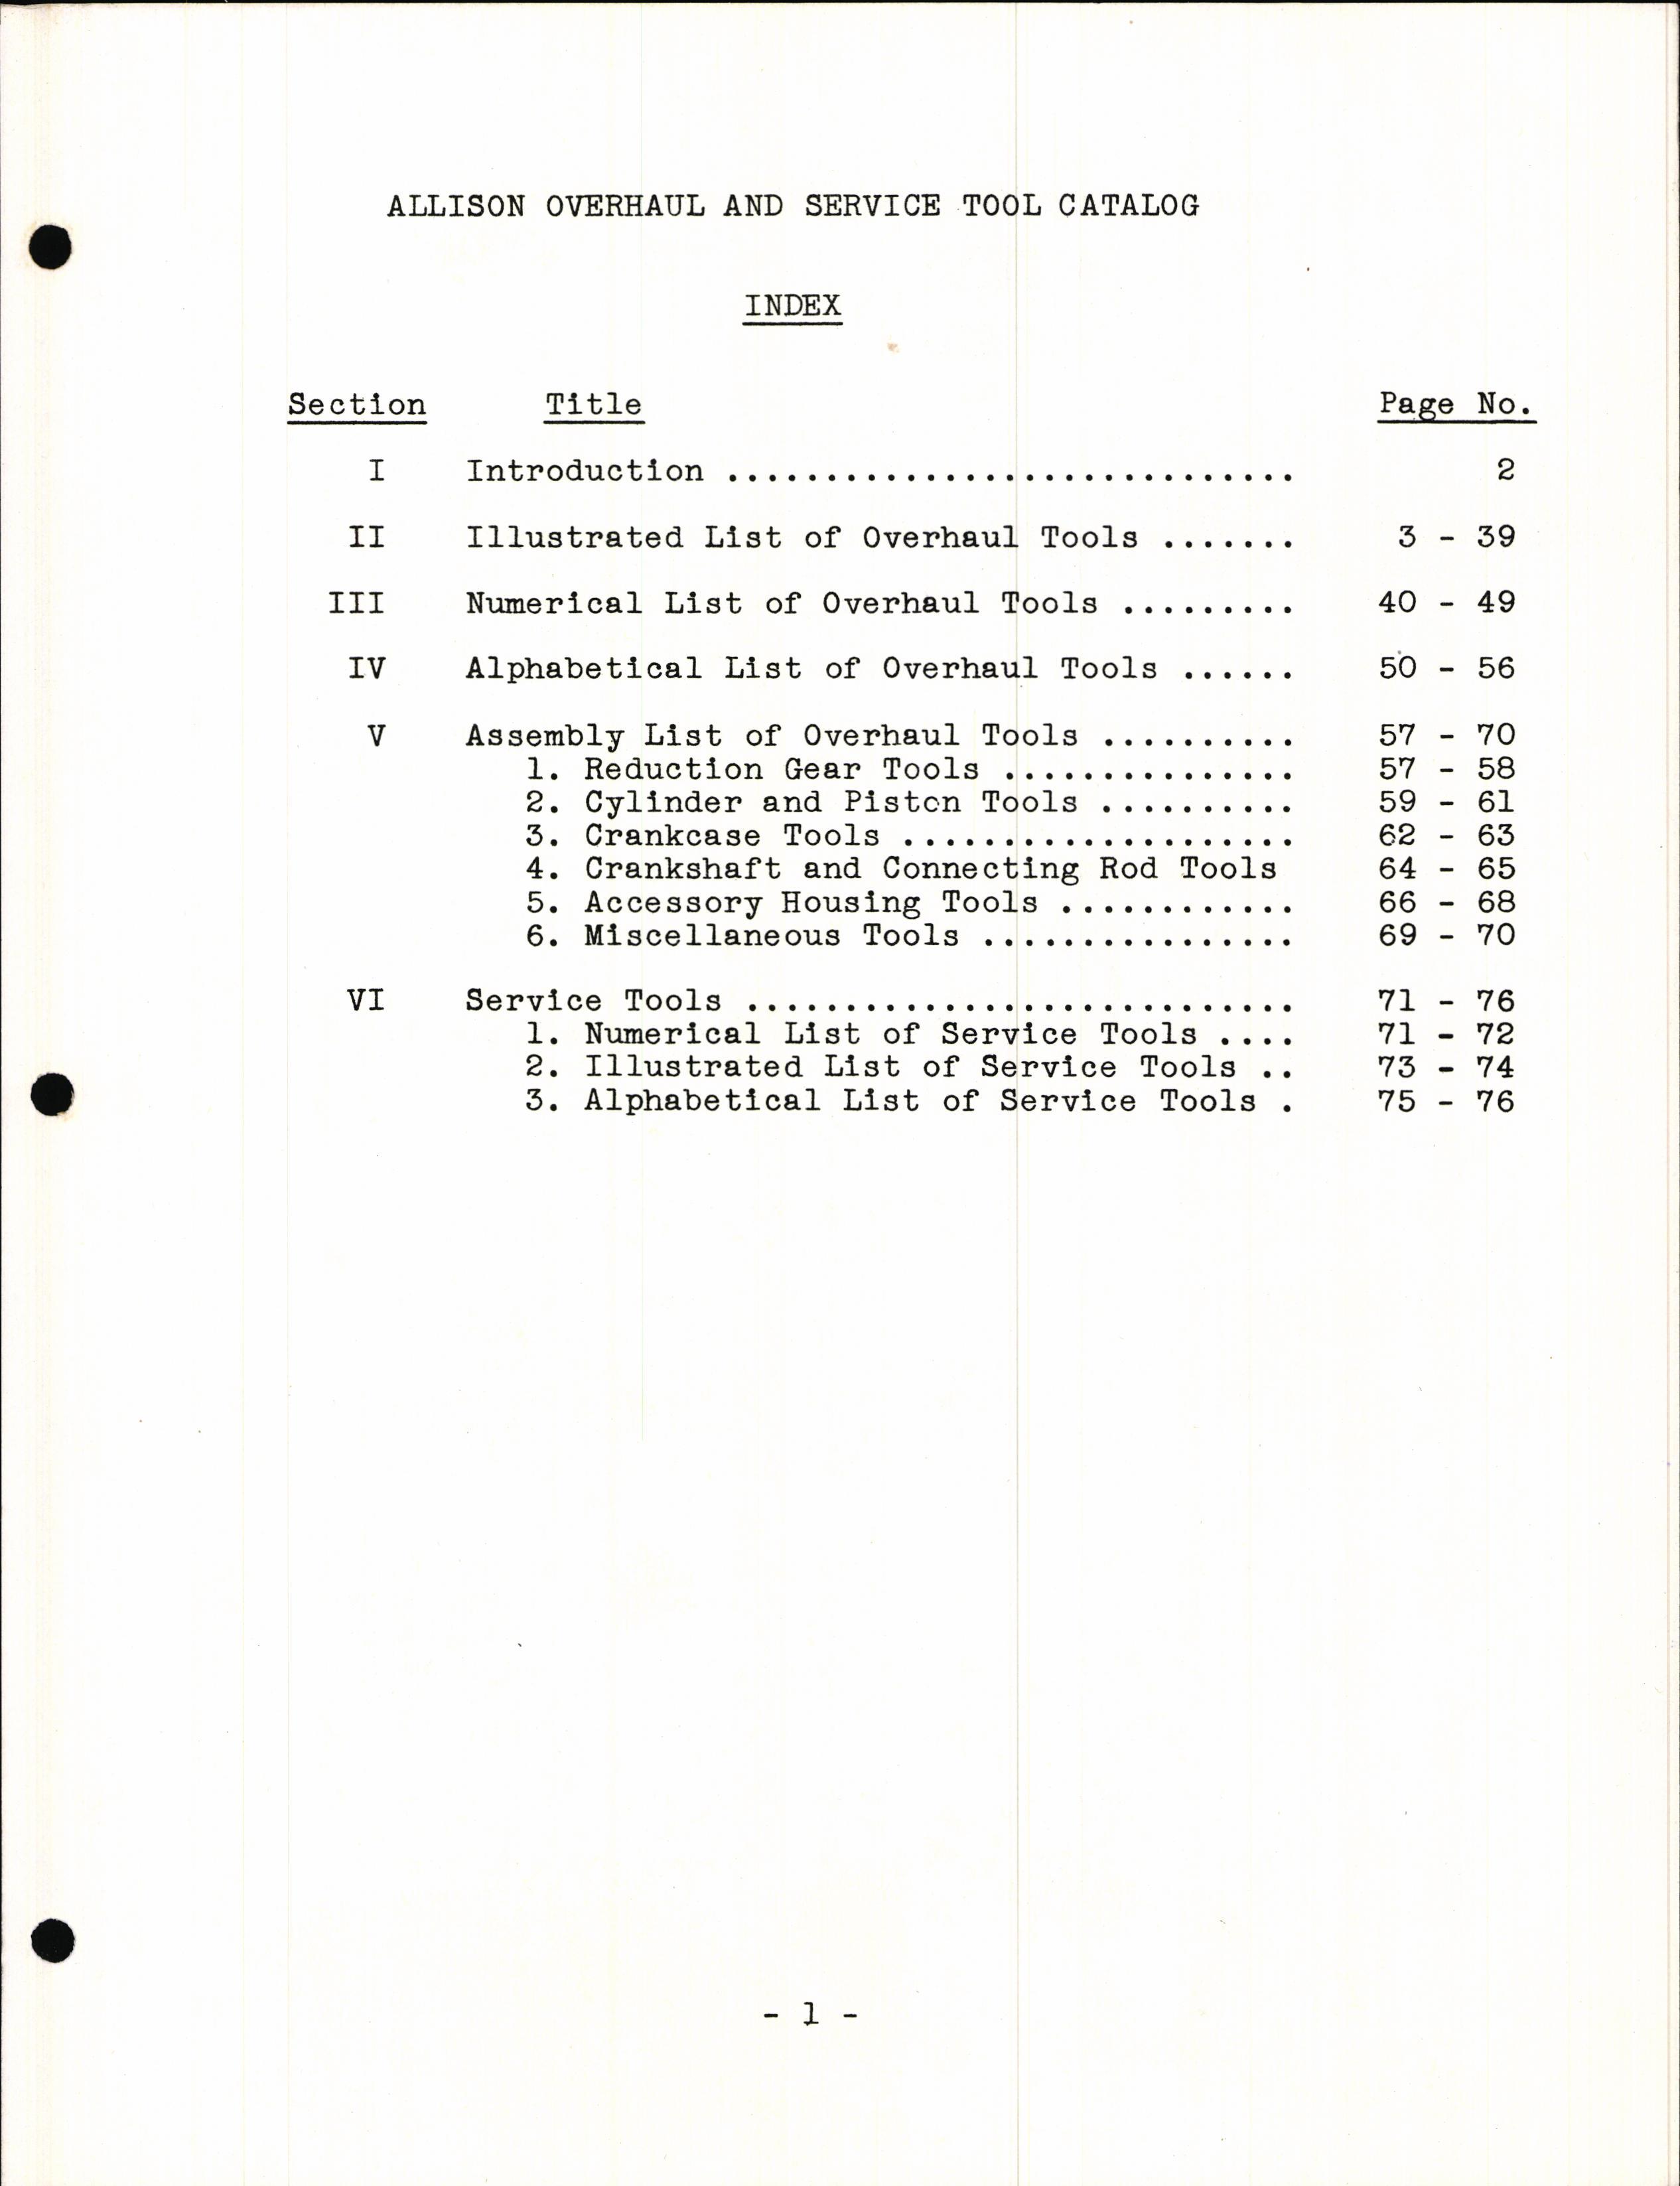 Sample page 3 from AirCorps Library document: Commercial Overhaul and Service Tool Catalog for Allison Engines